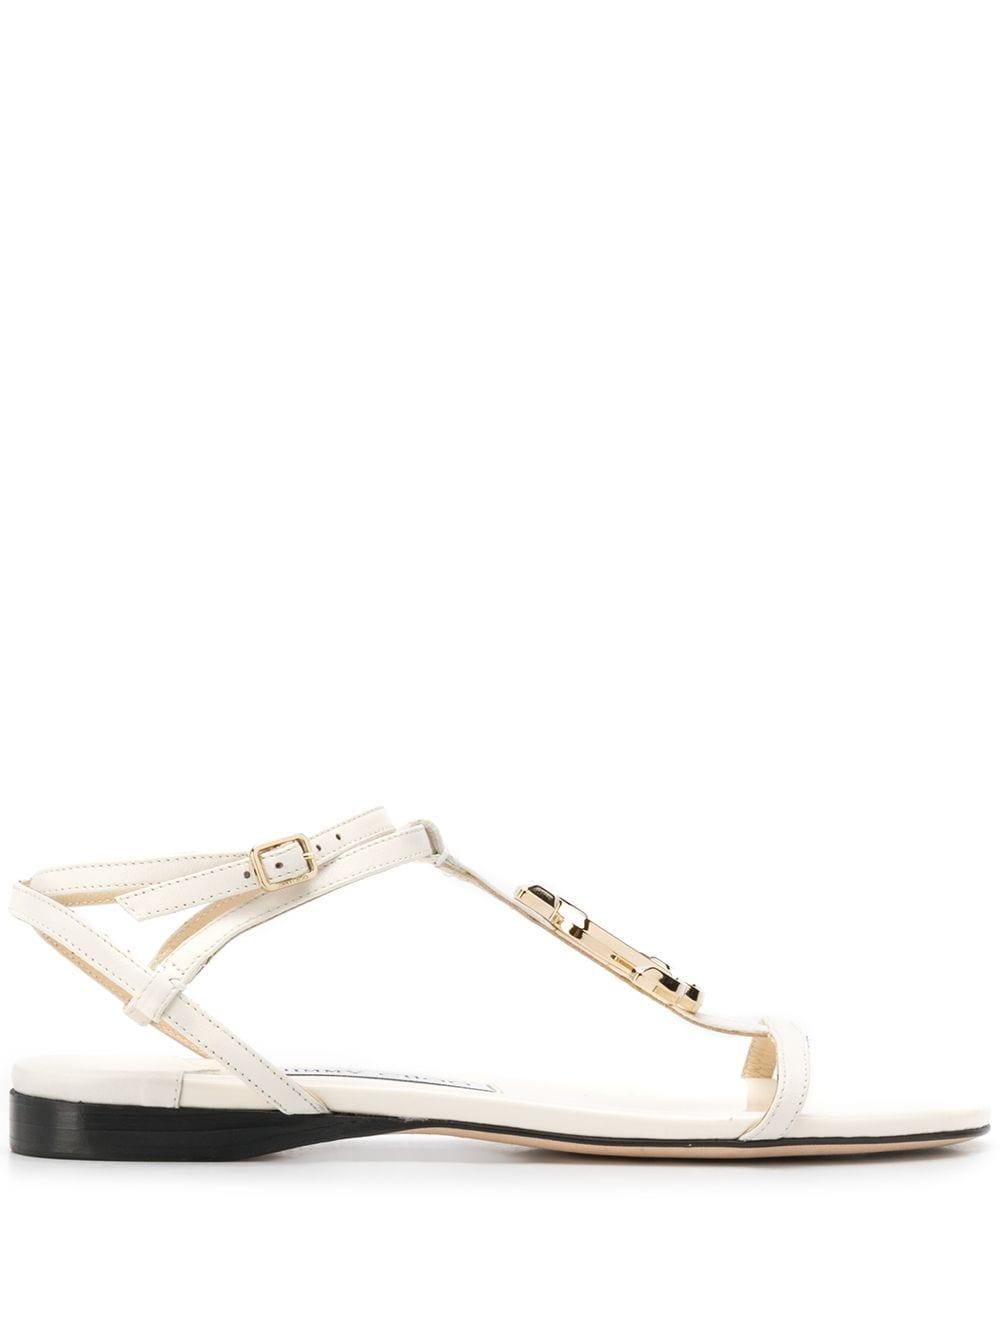 Jimmy Choo Leather Alodie Logo Flat Sandals in White - Lyst